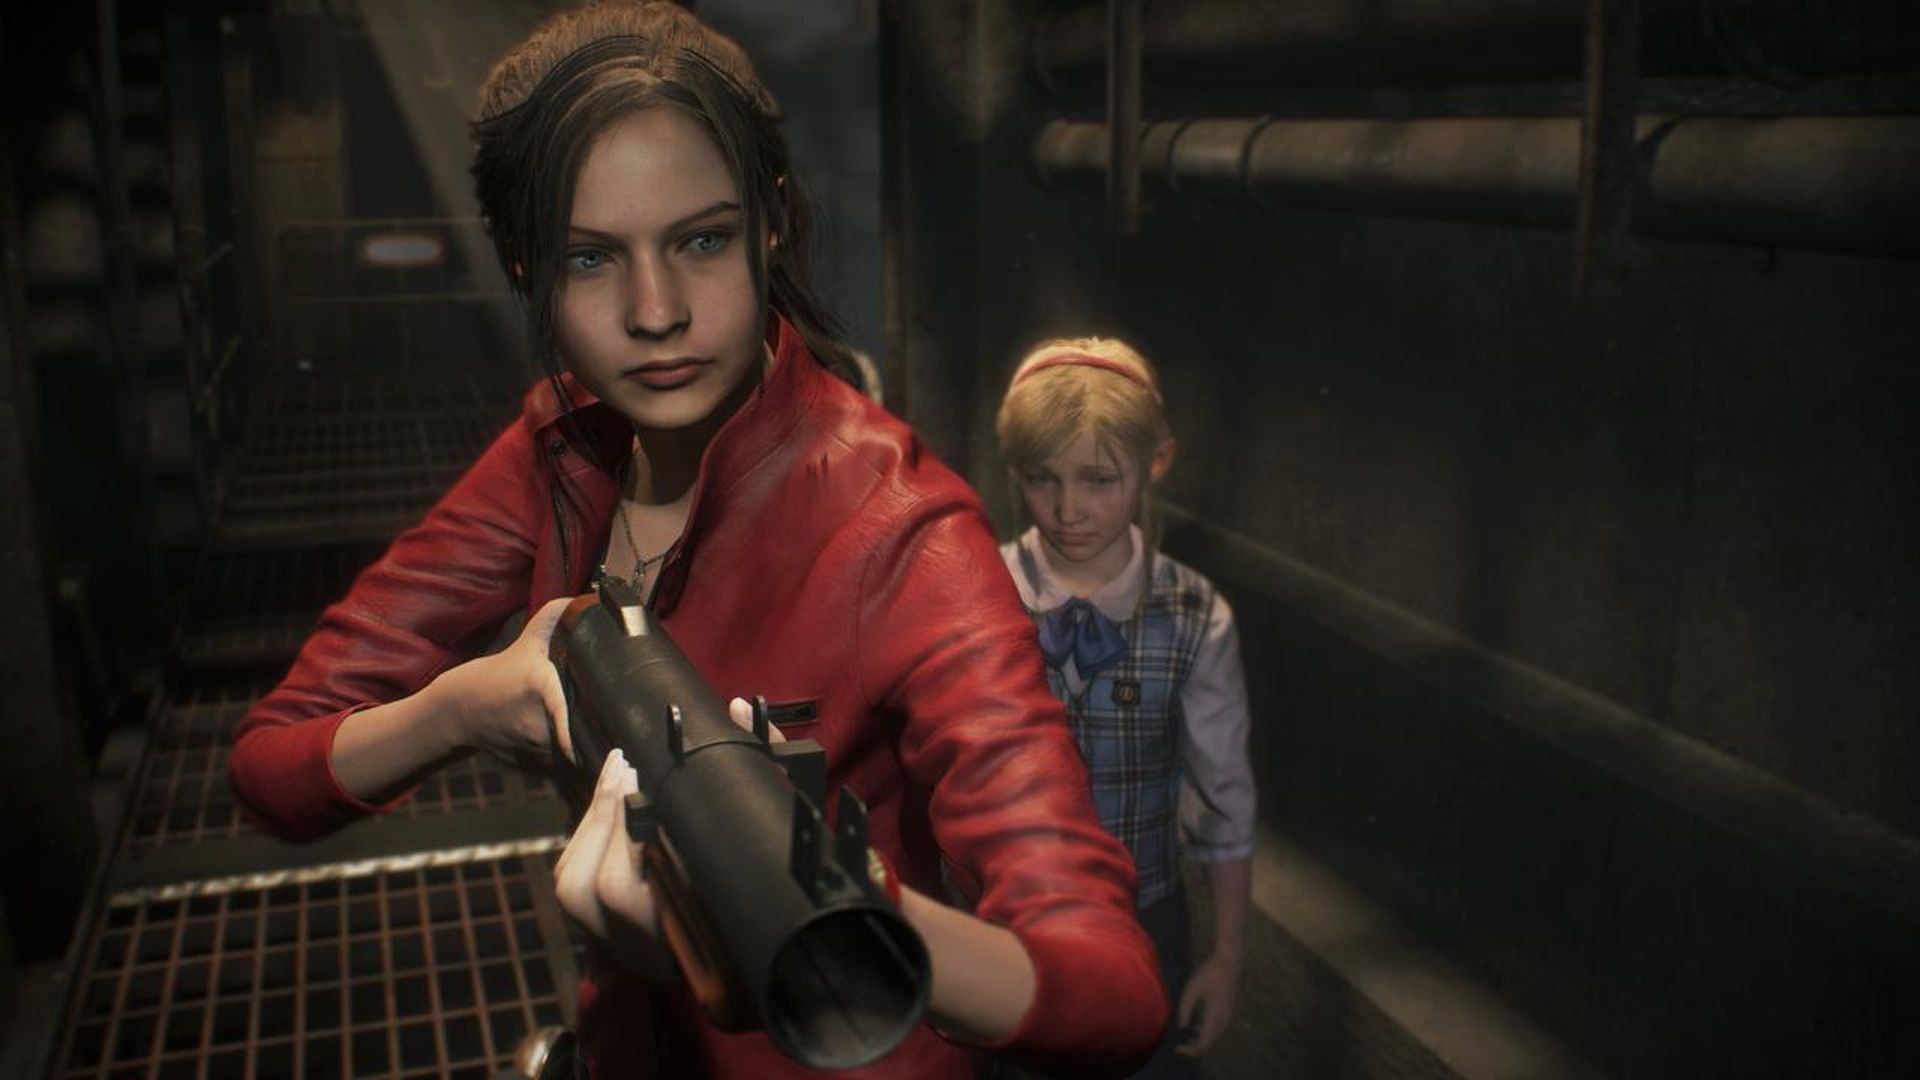 Resident Evil 4 Remake Sells 3 Million Copies in Two Days